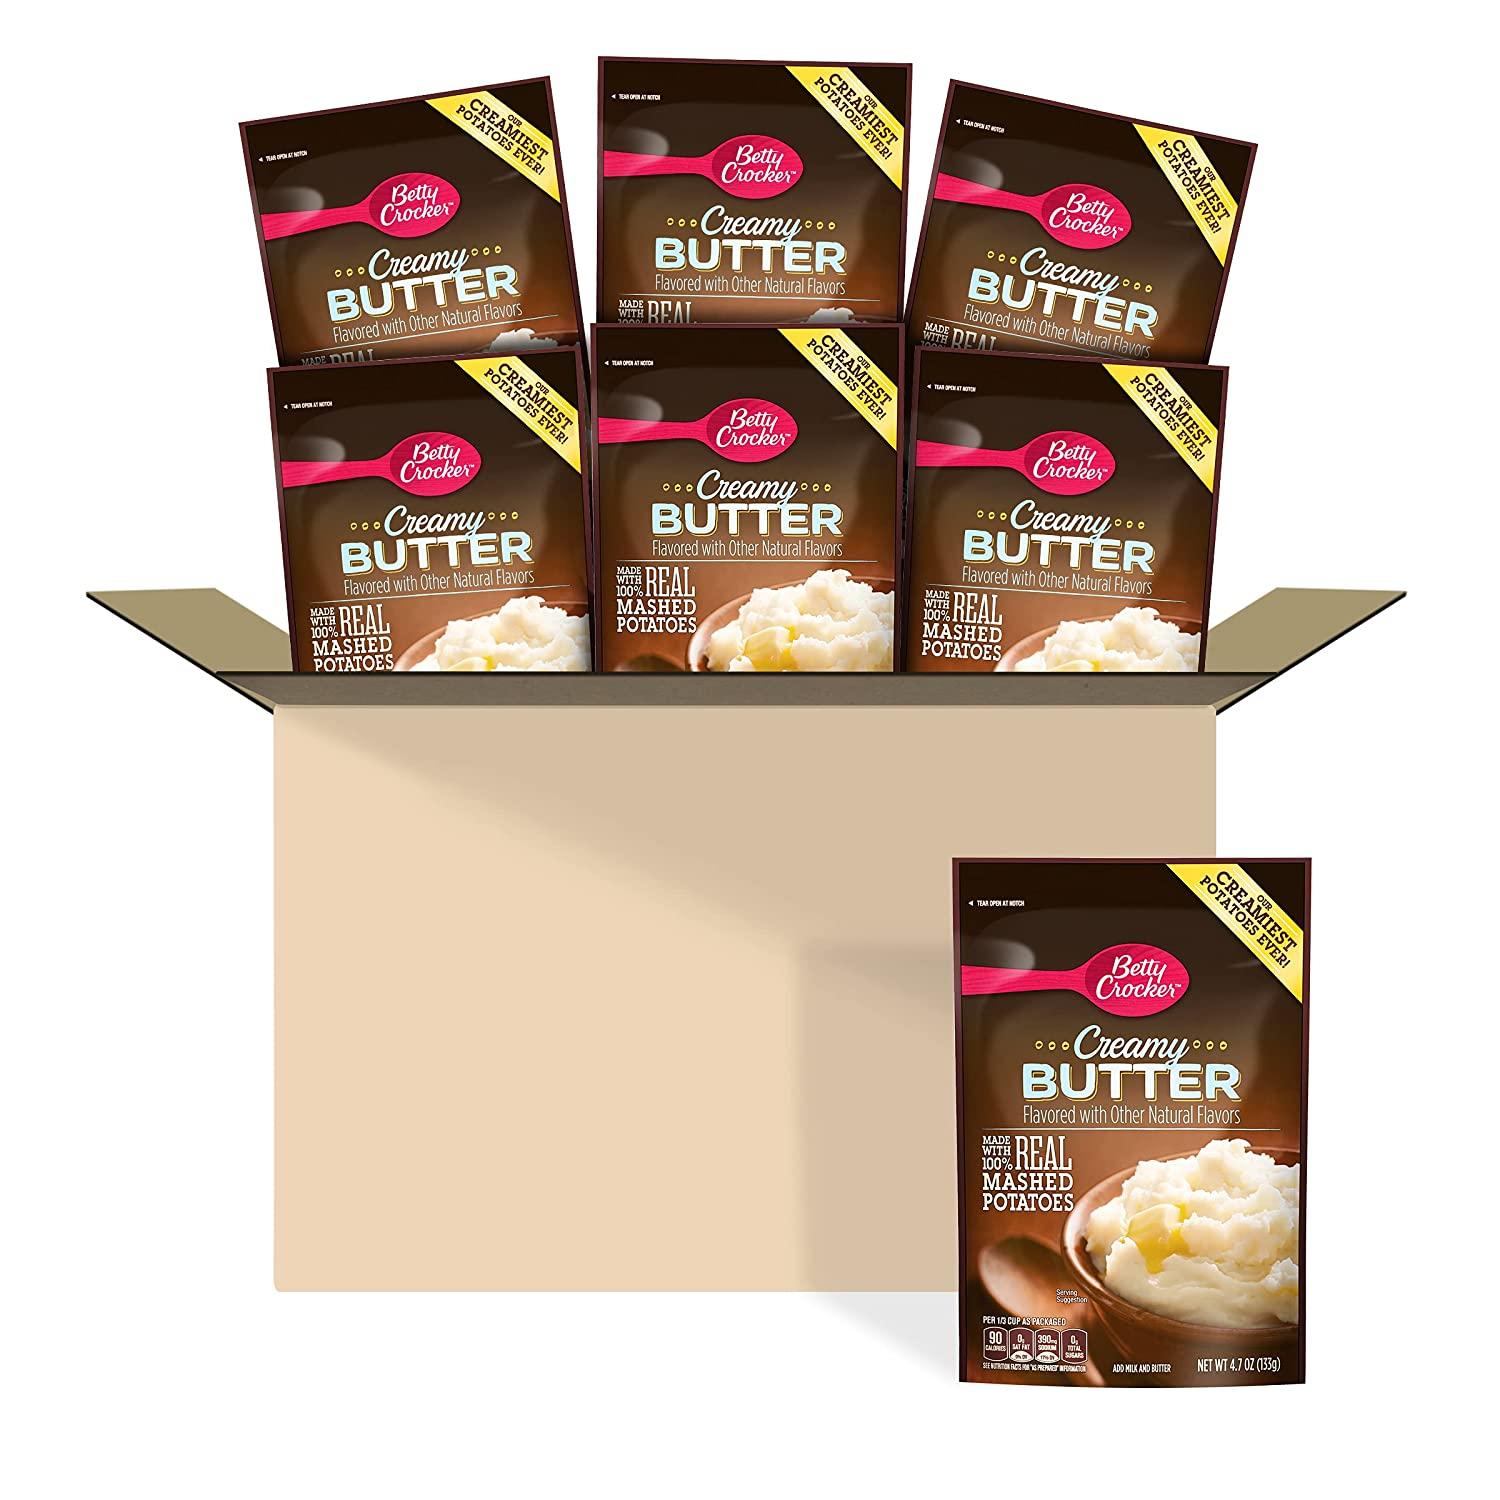 7 Betty Crocker Homestyle Creamy Butter Potatoes for $5.67 Shipped